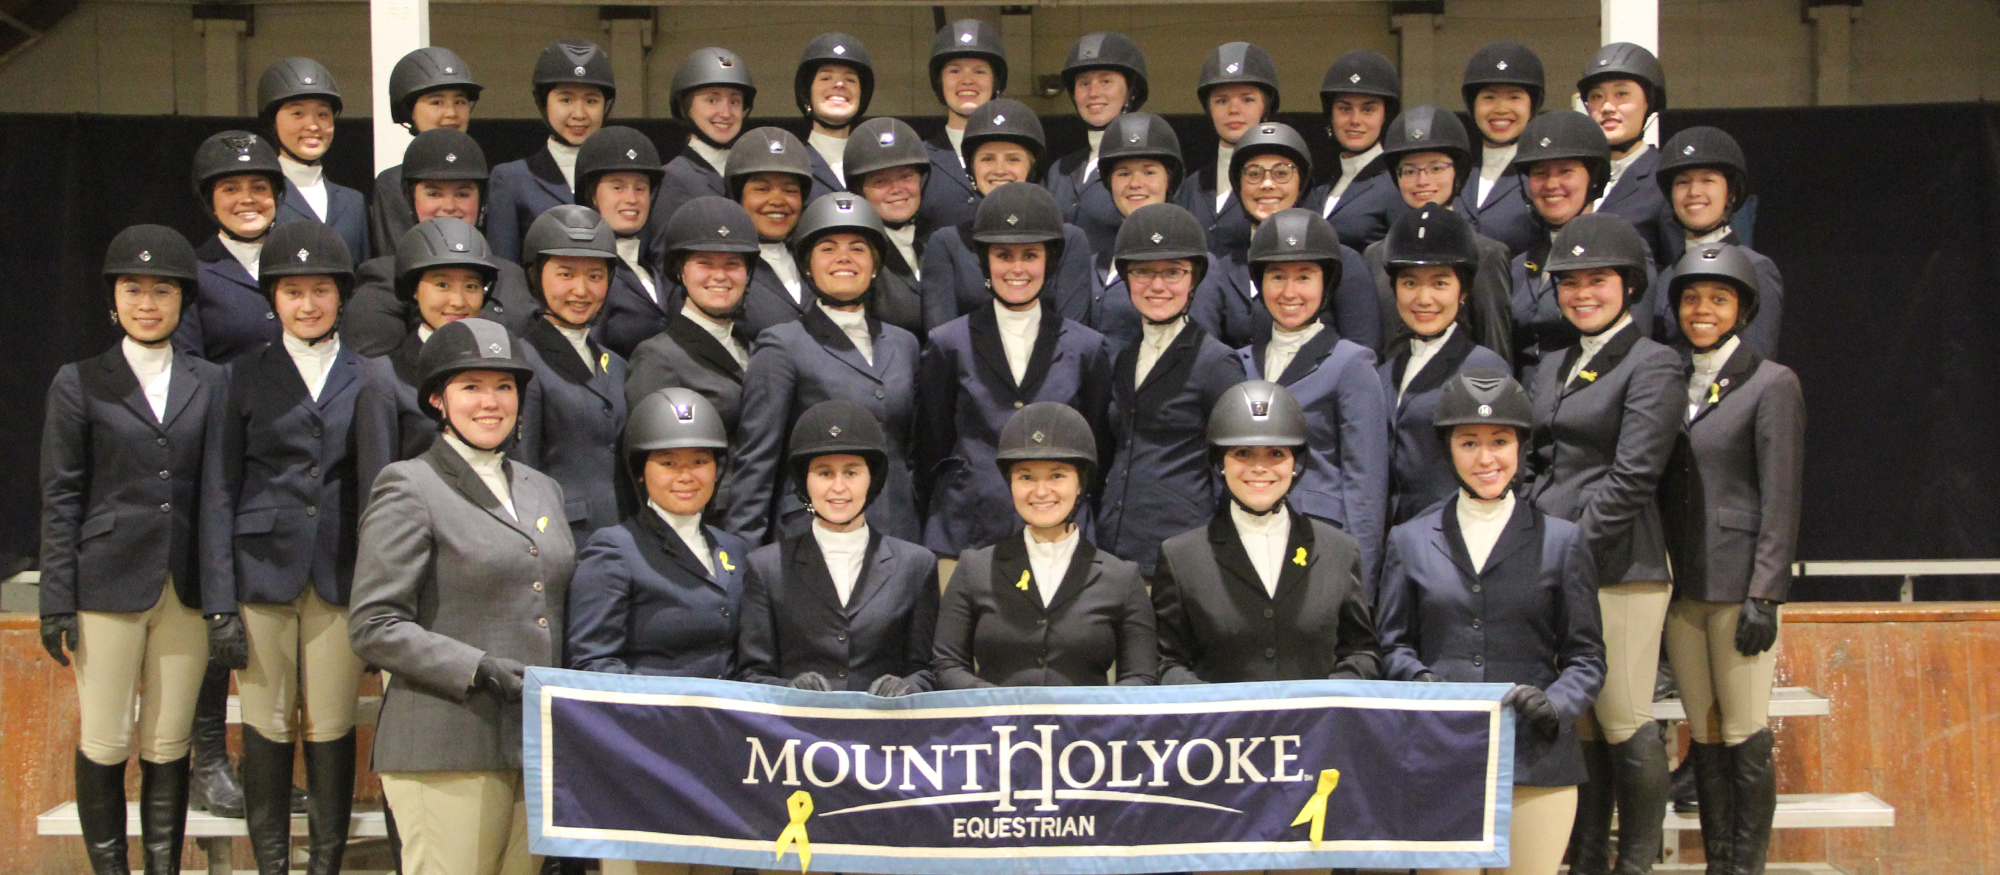 Group photo of the 2019 Spring Equestrian Team.